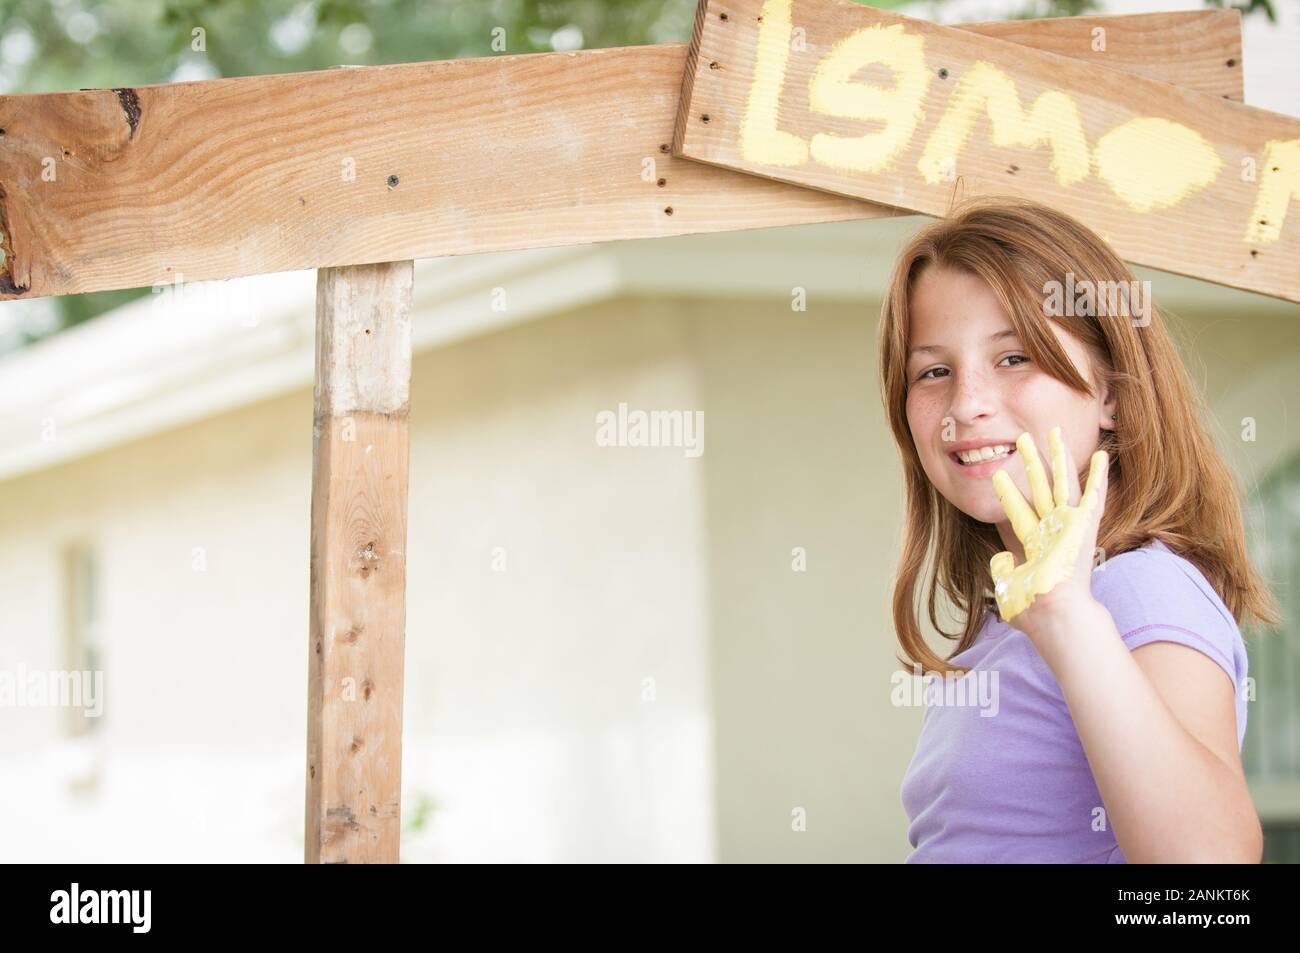 Young girl painting a lemonade stand Stock Photo